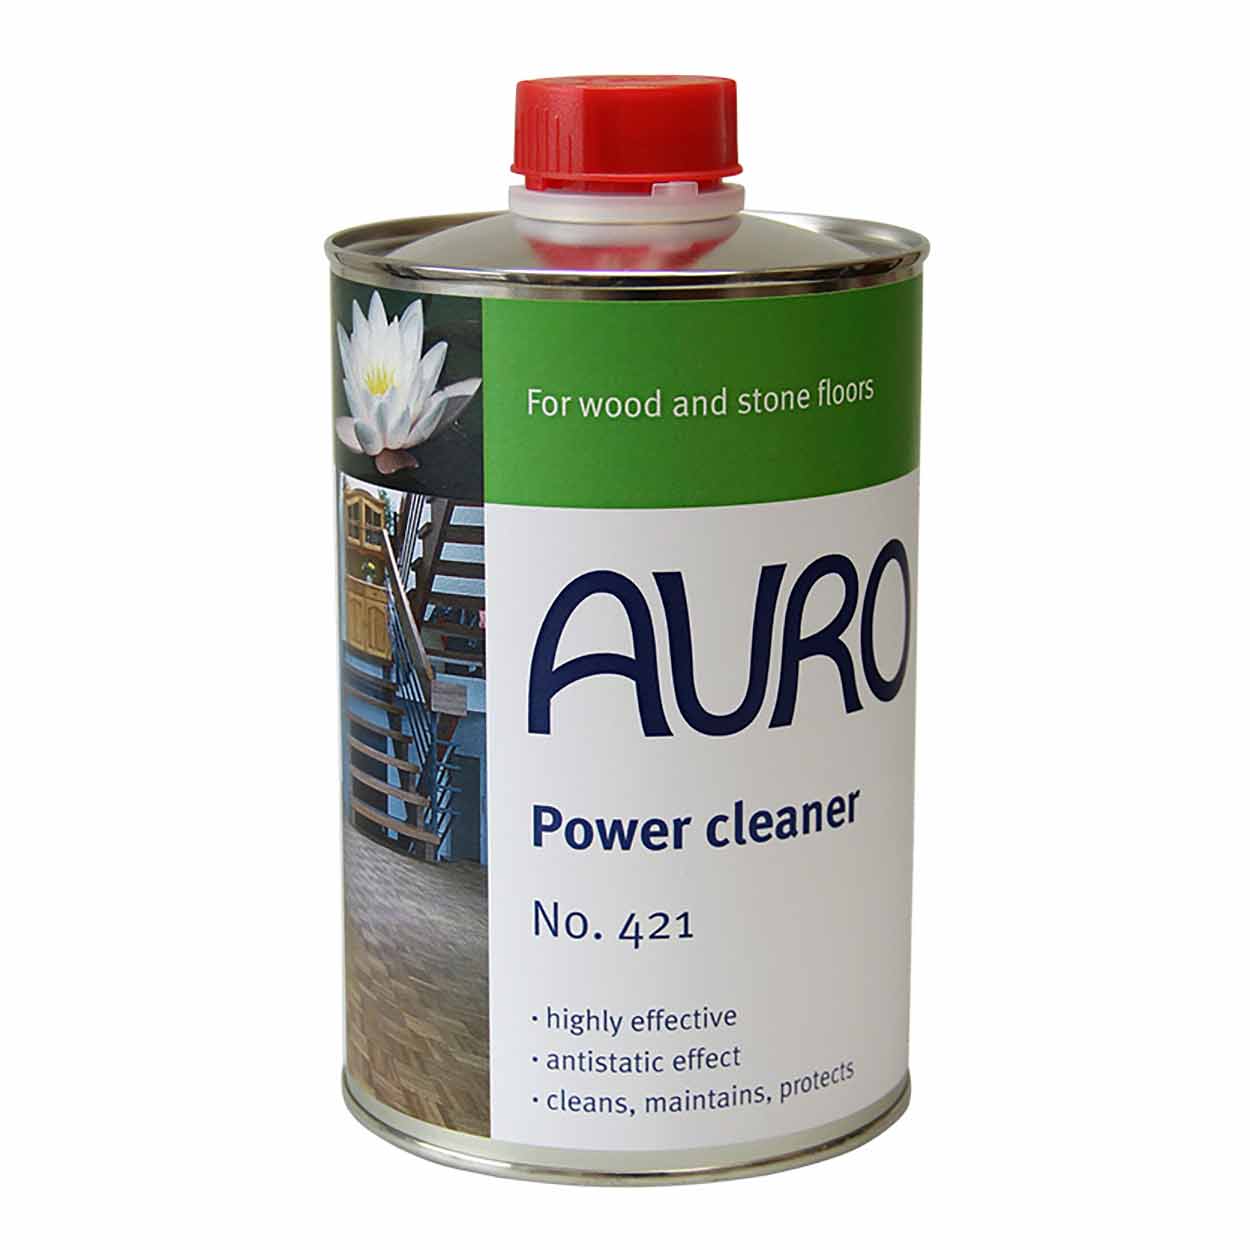 Auro 421 Natural Power Cleaner for Wax floors